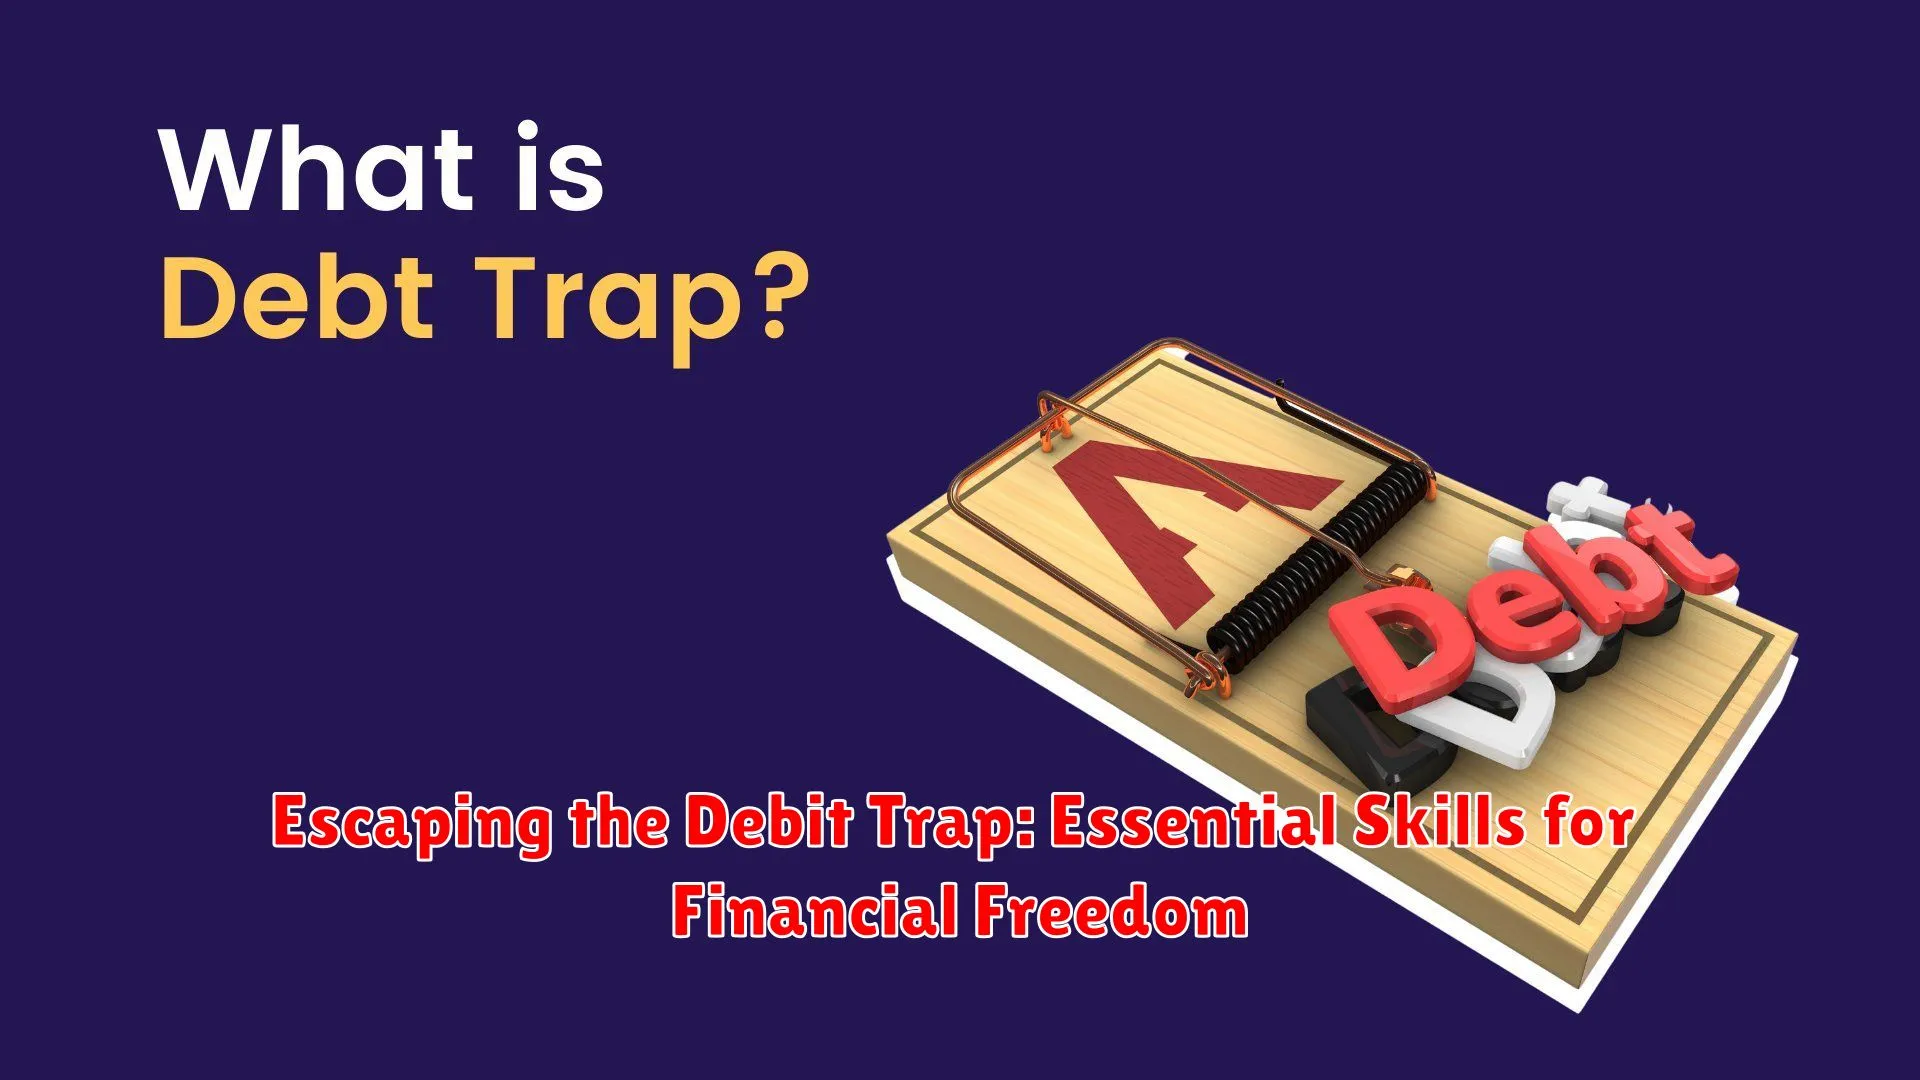 Escaping the Debit Trap: Essential Skills for Financial Freedom